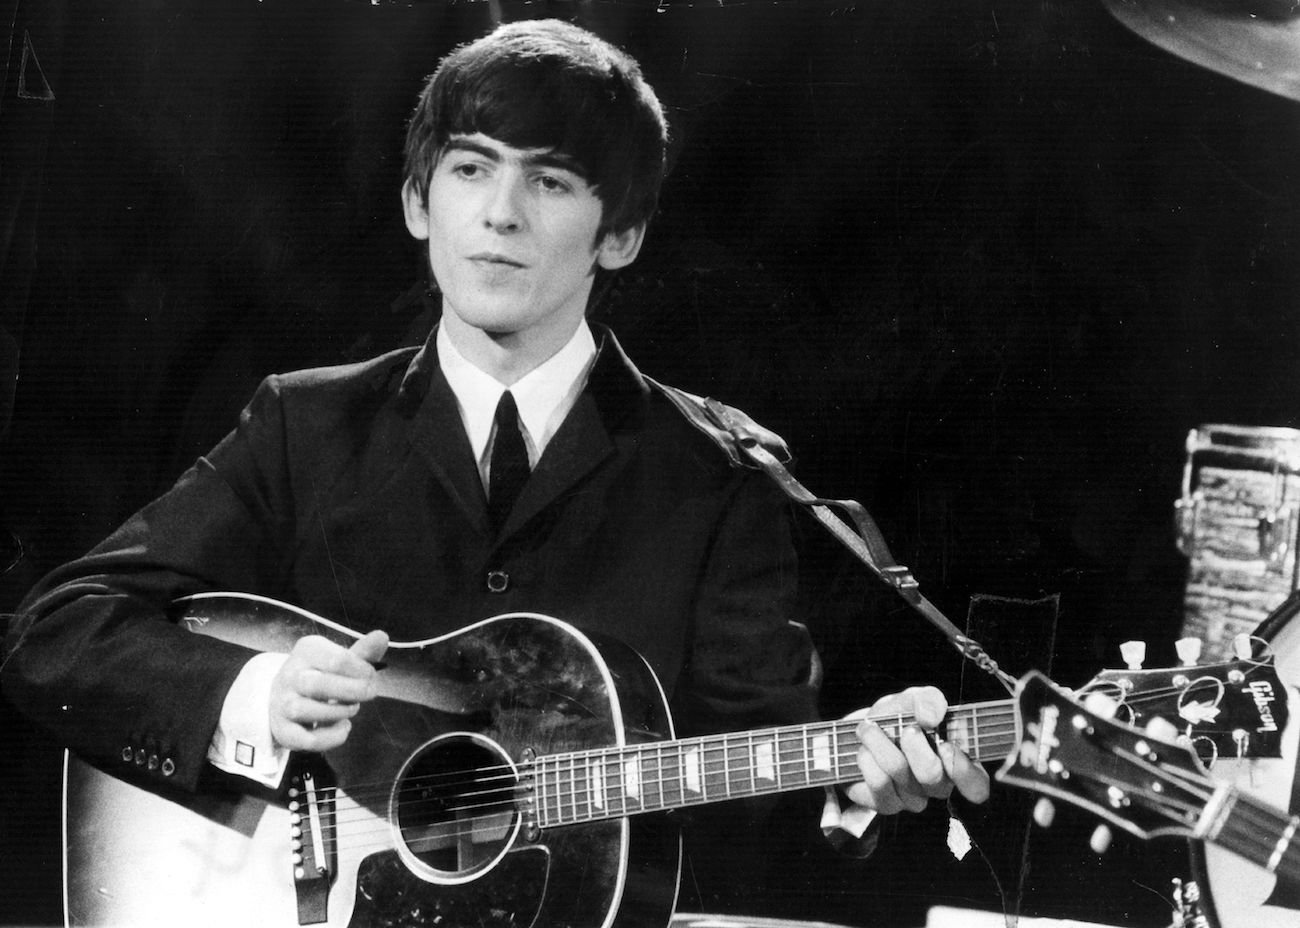 George Harrison performing with The Beatles in 1963.